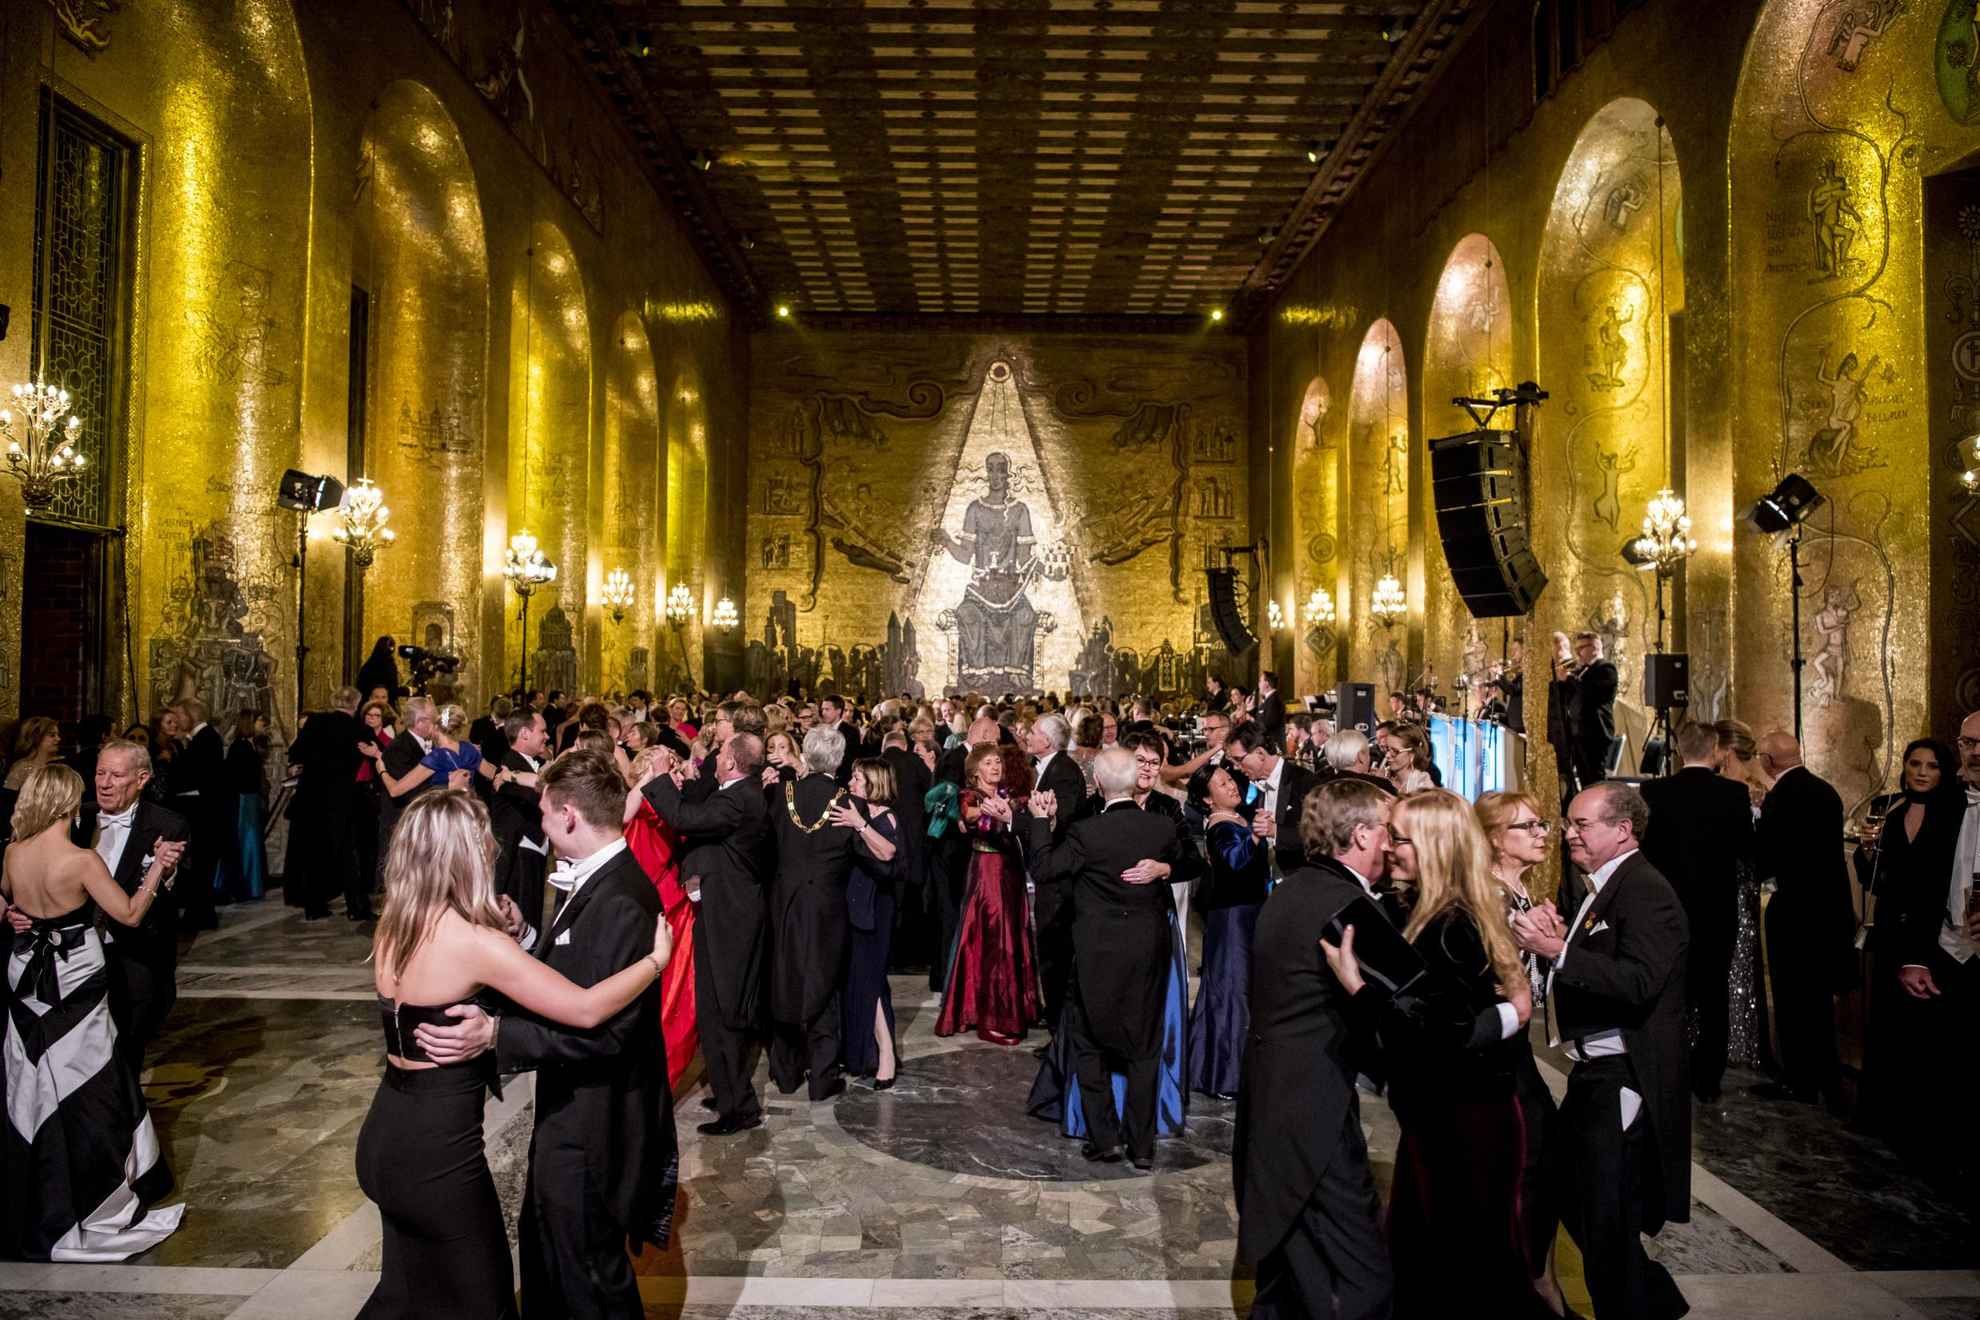 People dancing in a golden hall.